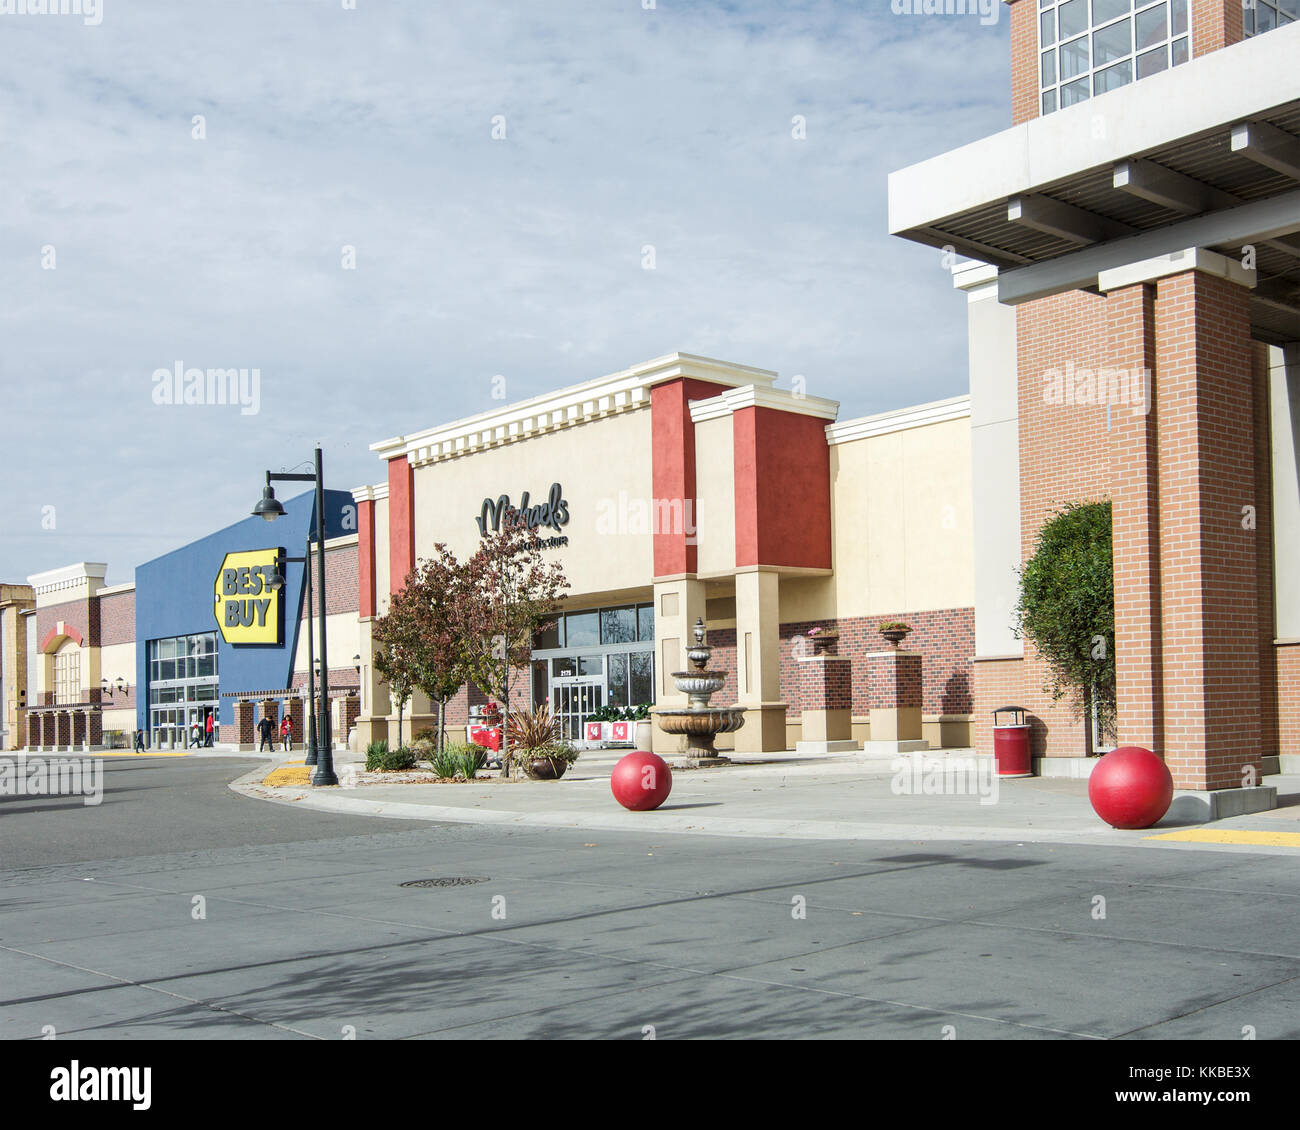 Overview of Woodland Gateway Shopping Center featuring Target, Michaels arts and crafts and Best Buy, California, USA Stock Photo